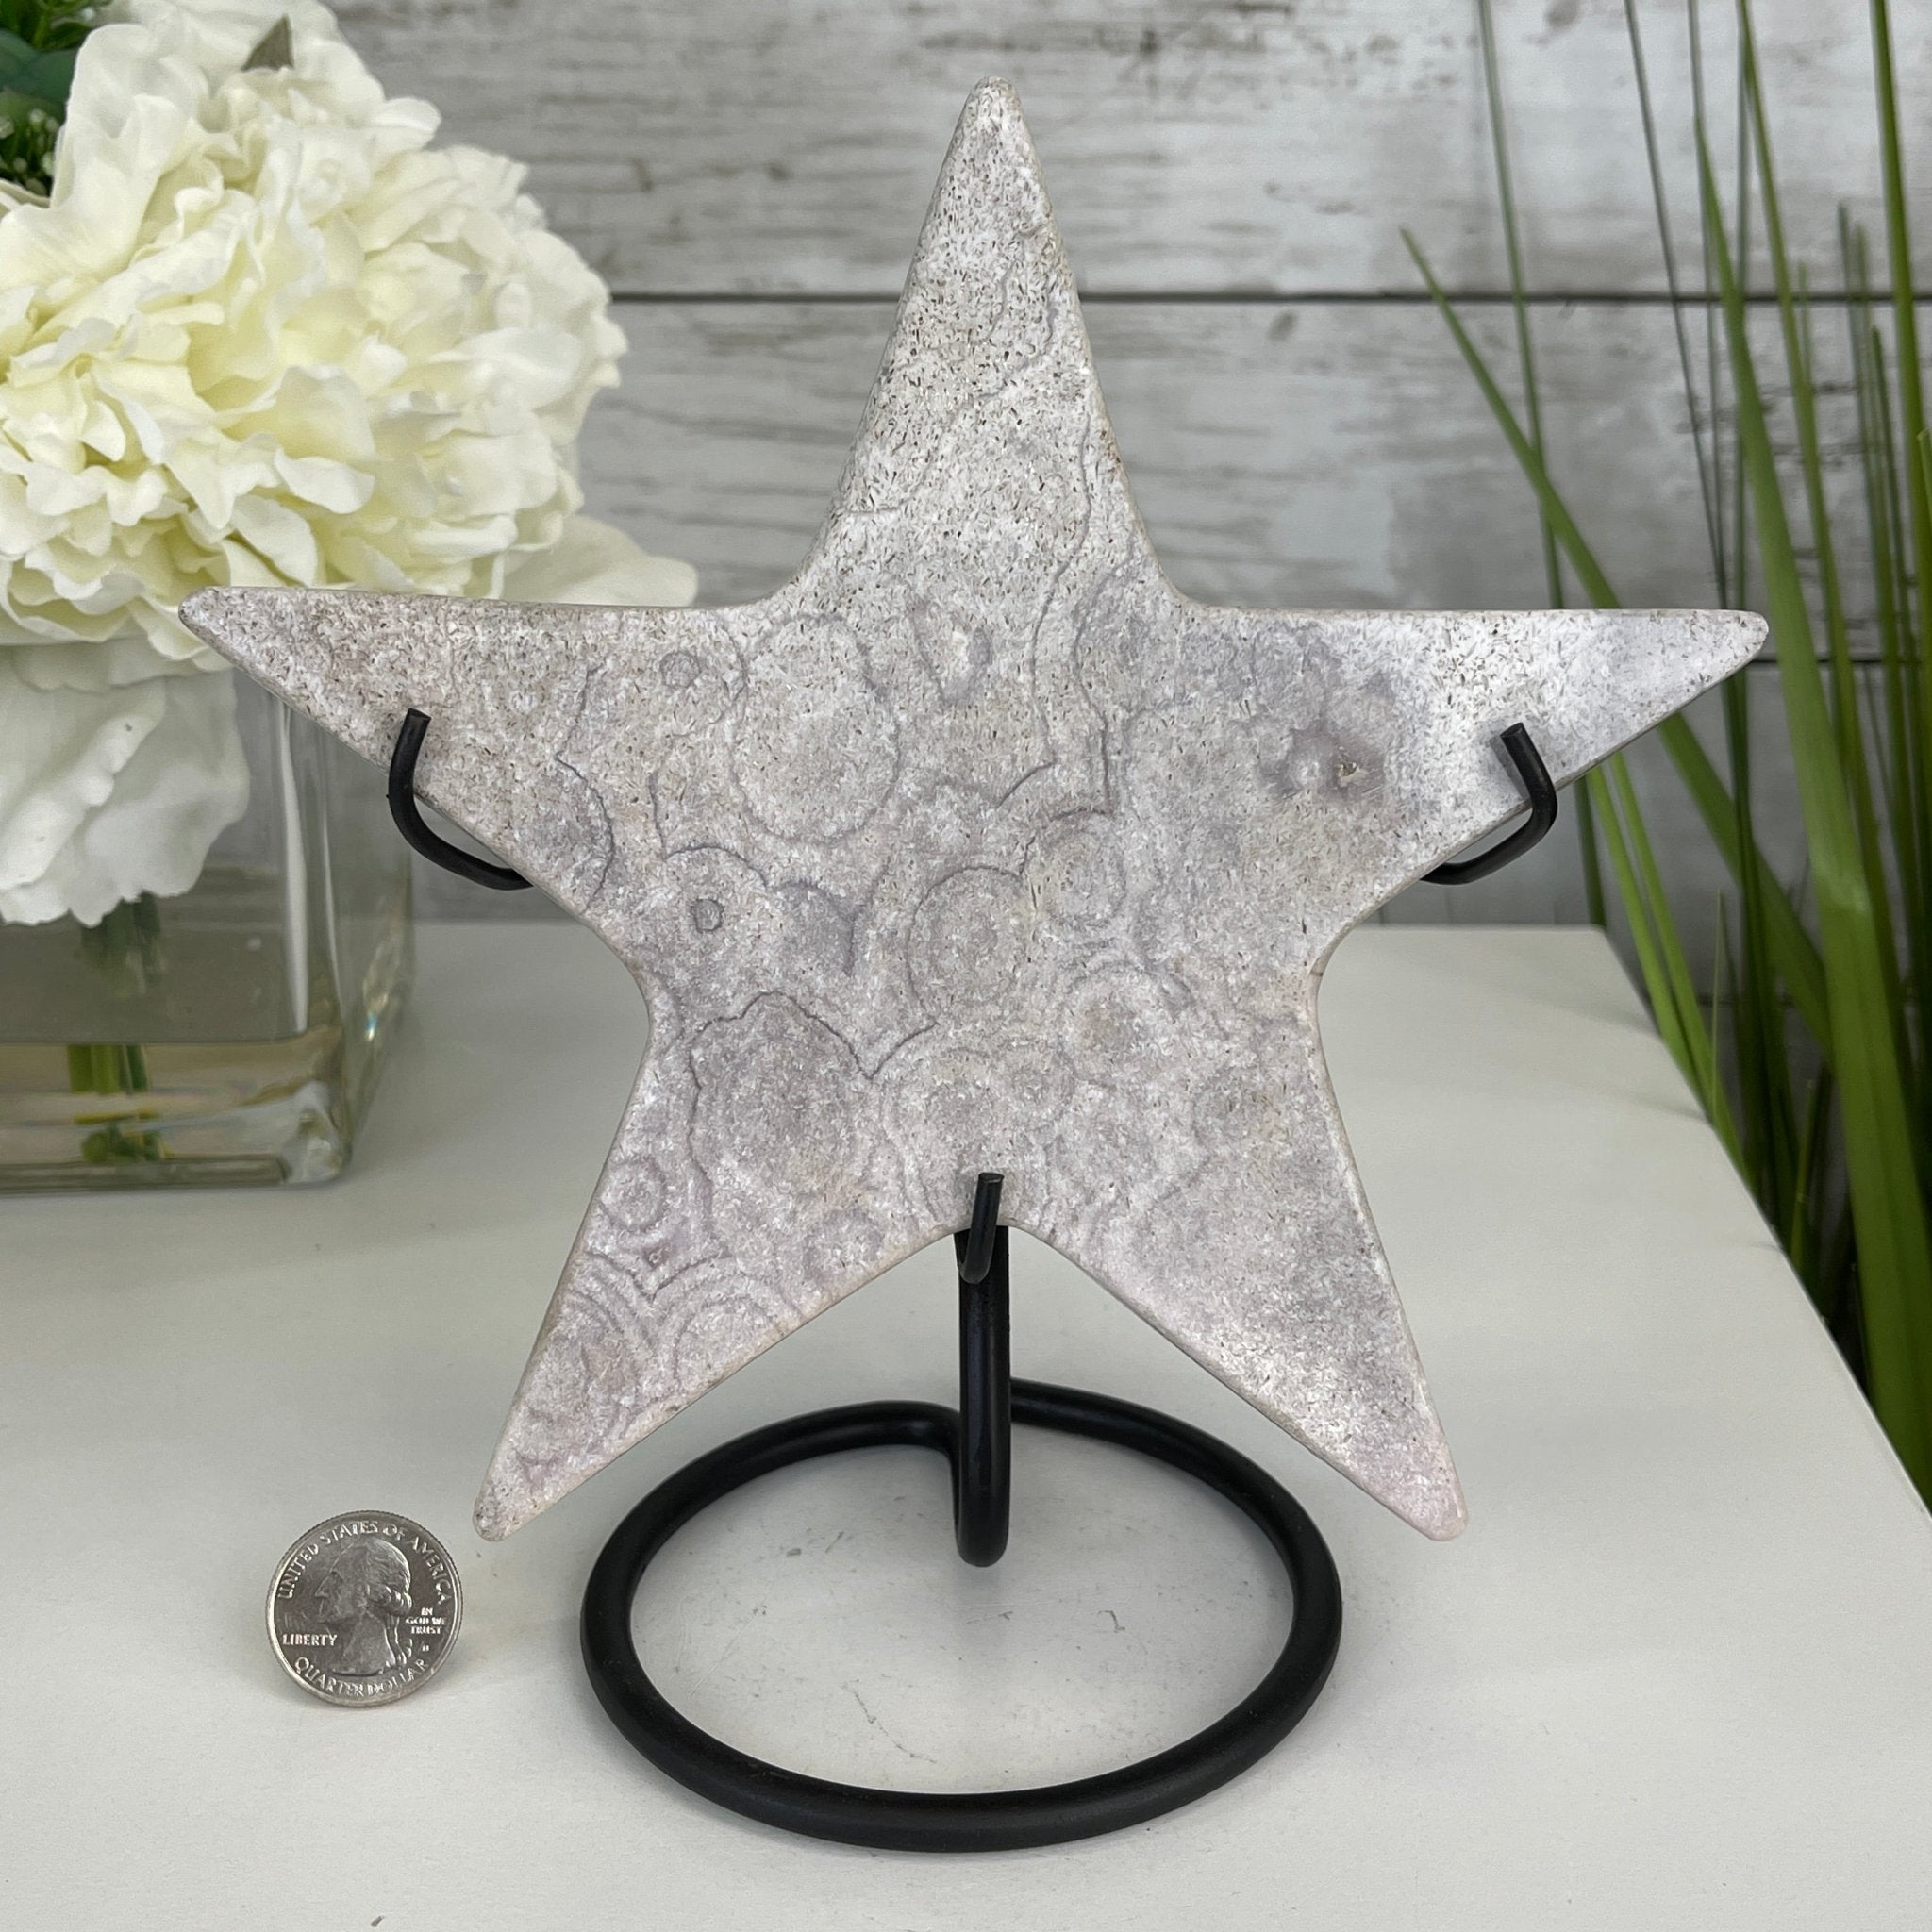 Pink Amethyst Star on a Metal Stand 8" Tall #5746-0017 by Brazil Gems - Brazil GemsBrazil GemsPink Amethyst Star on a Metal Stand 8" Tall #5746-0017 by Brazil GemsStars5746-0017